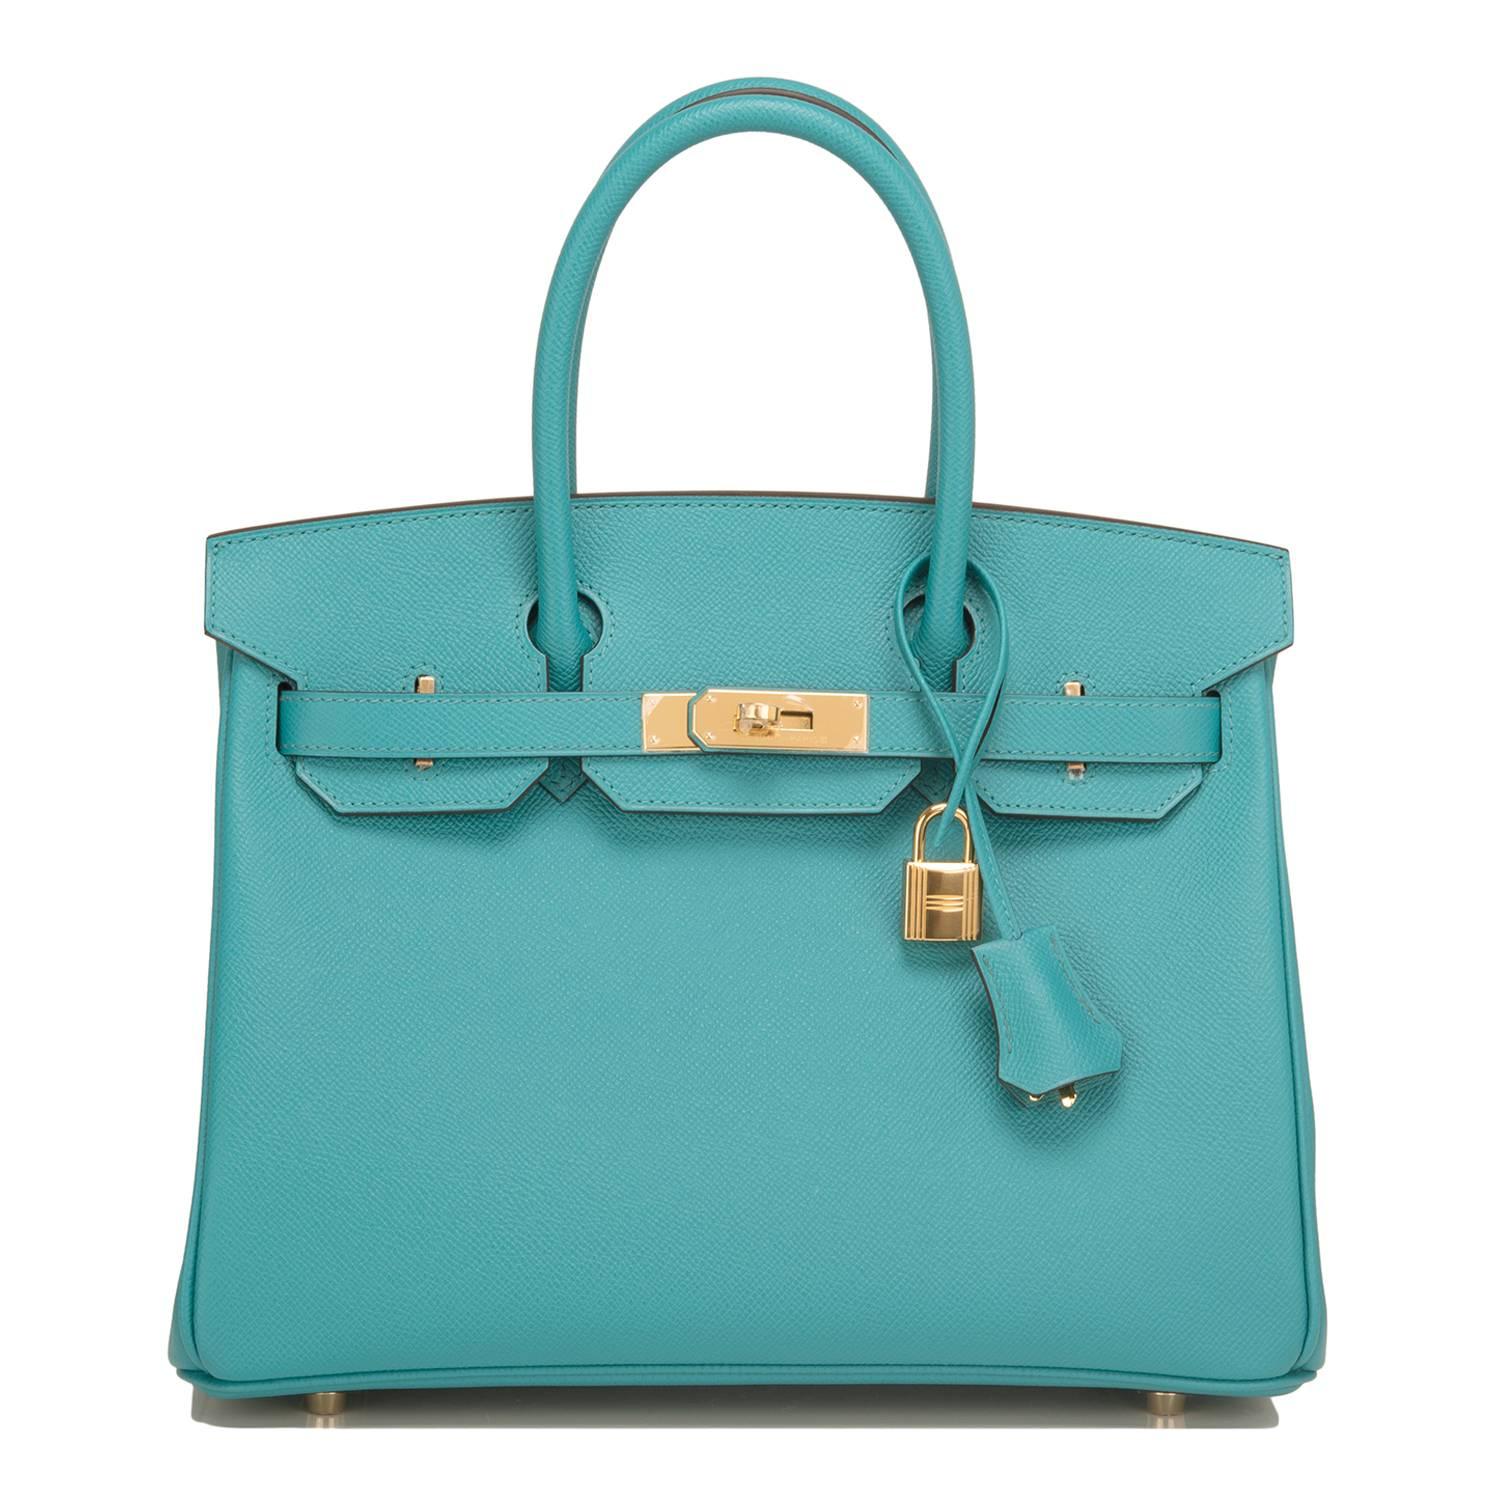 Hermes Blue Paon Birkin 30cm of epsom leather with gold hardware.

This Birkin has tonal stitching, a front toggle closure, a clochette with lock and two keys, and double rolled handles.

The interior is lined with Blue Paon chevre and has one